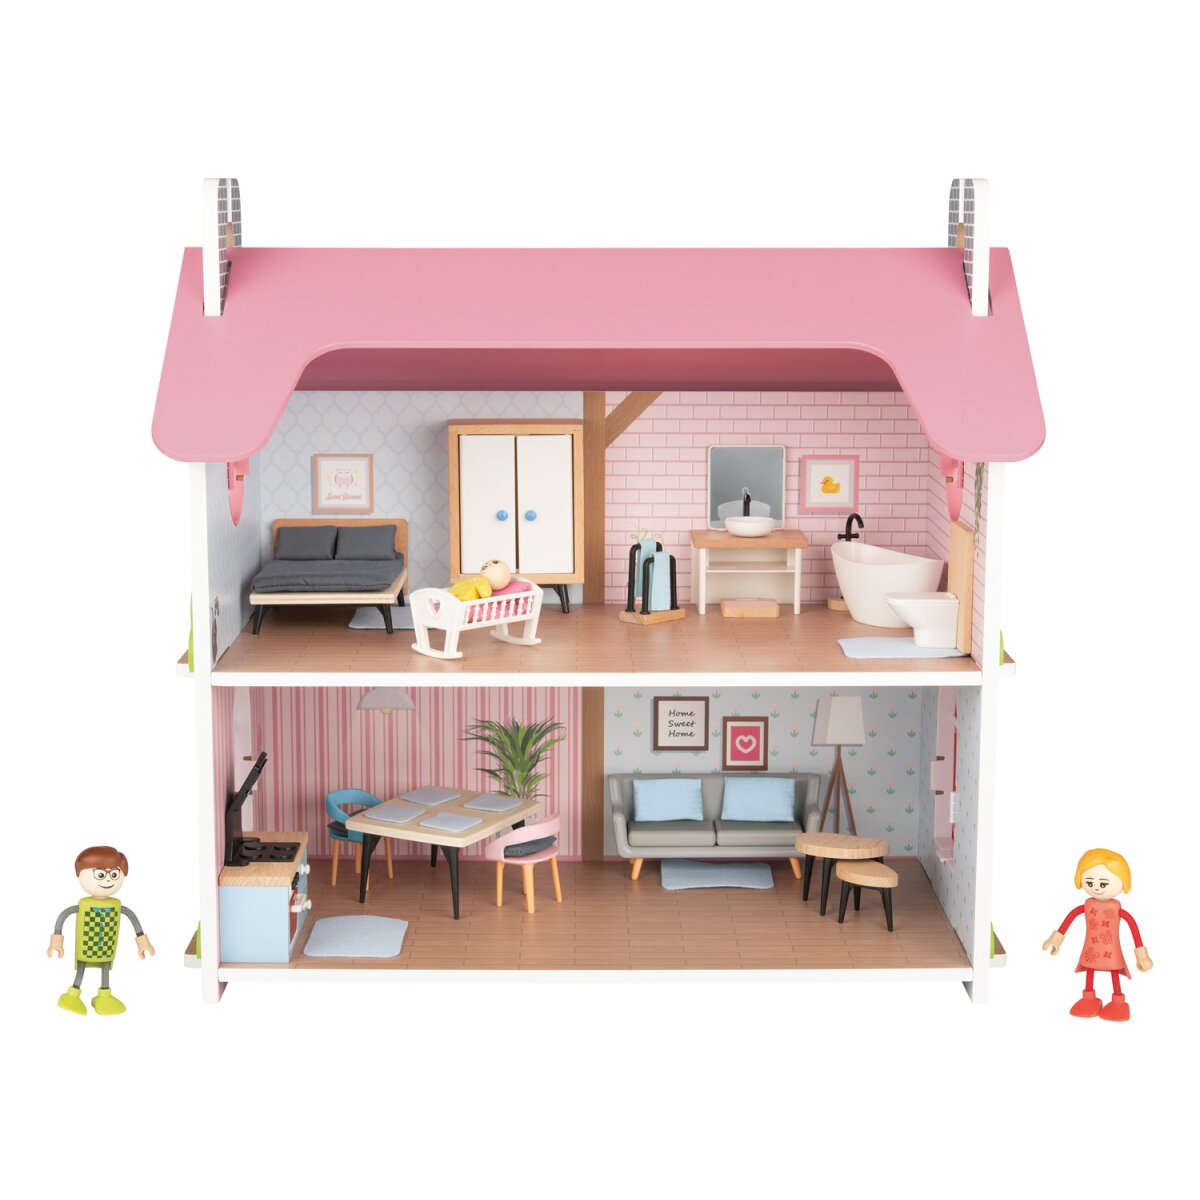 26,99 gut, Puppenhaus, Holz - B-Ware € Playtive 41-teilig, sehr Dach abnehmbares